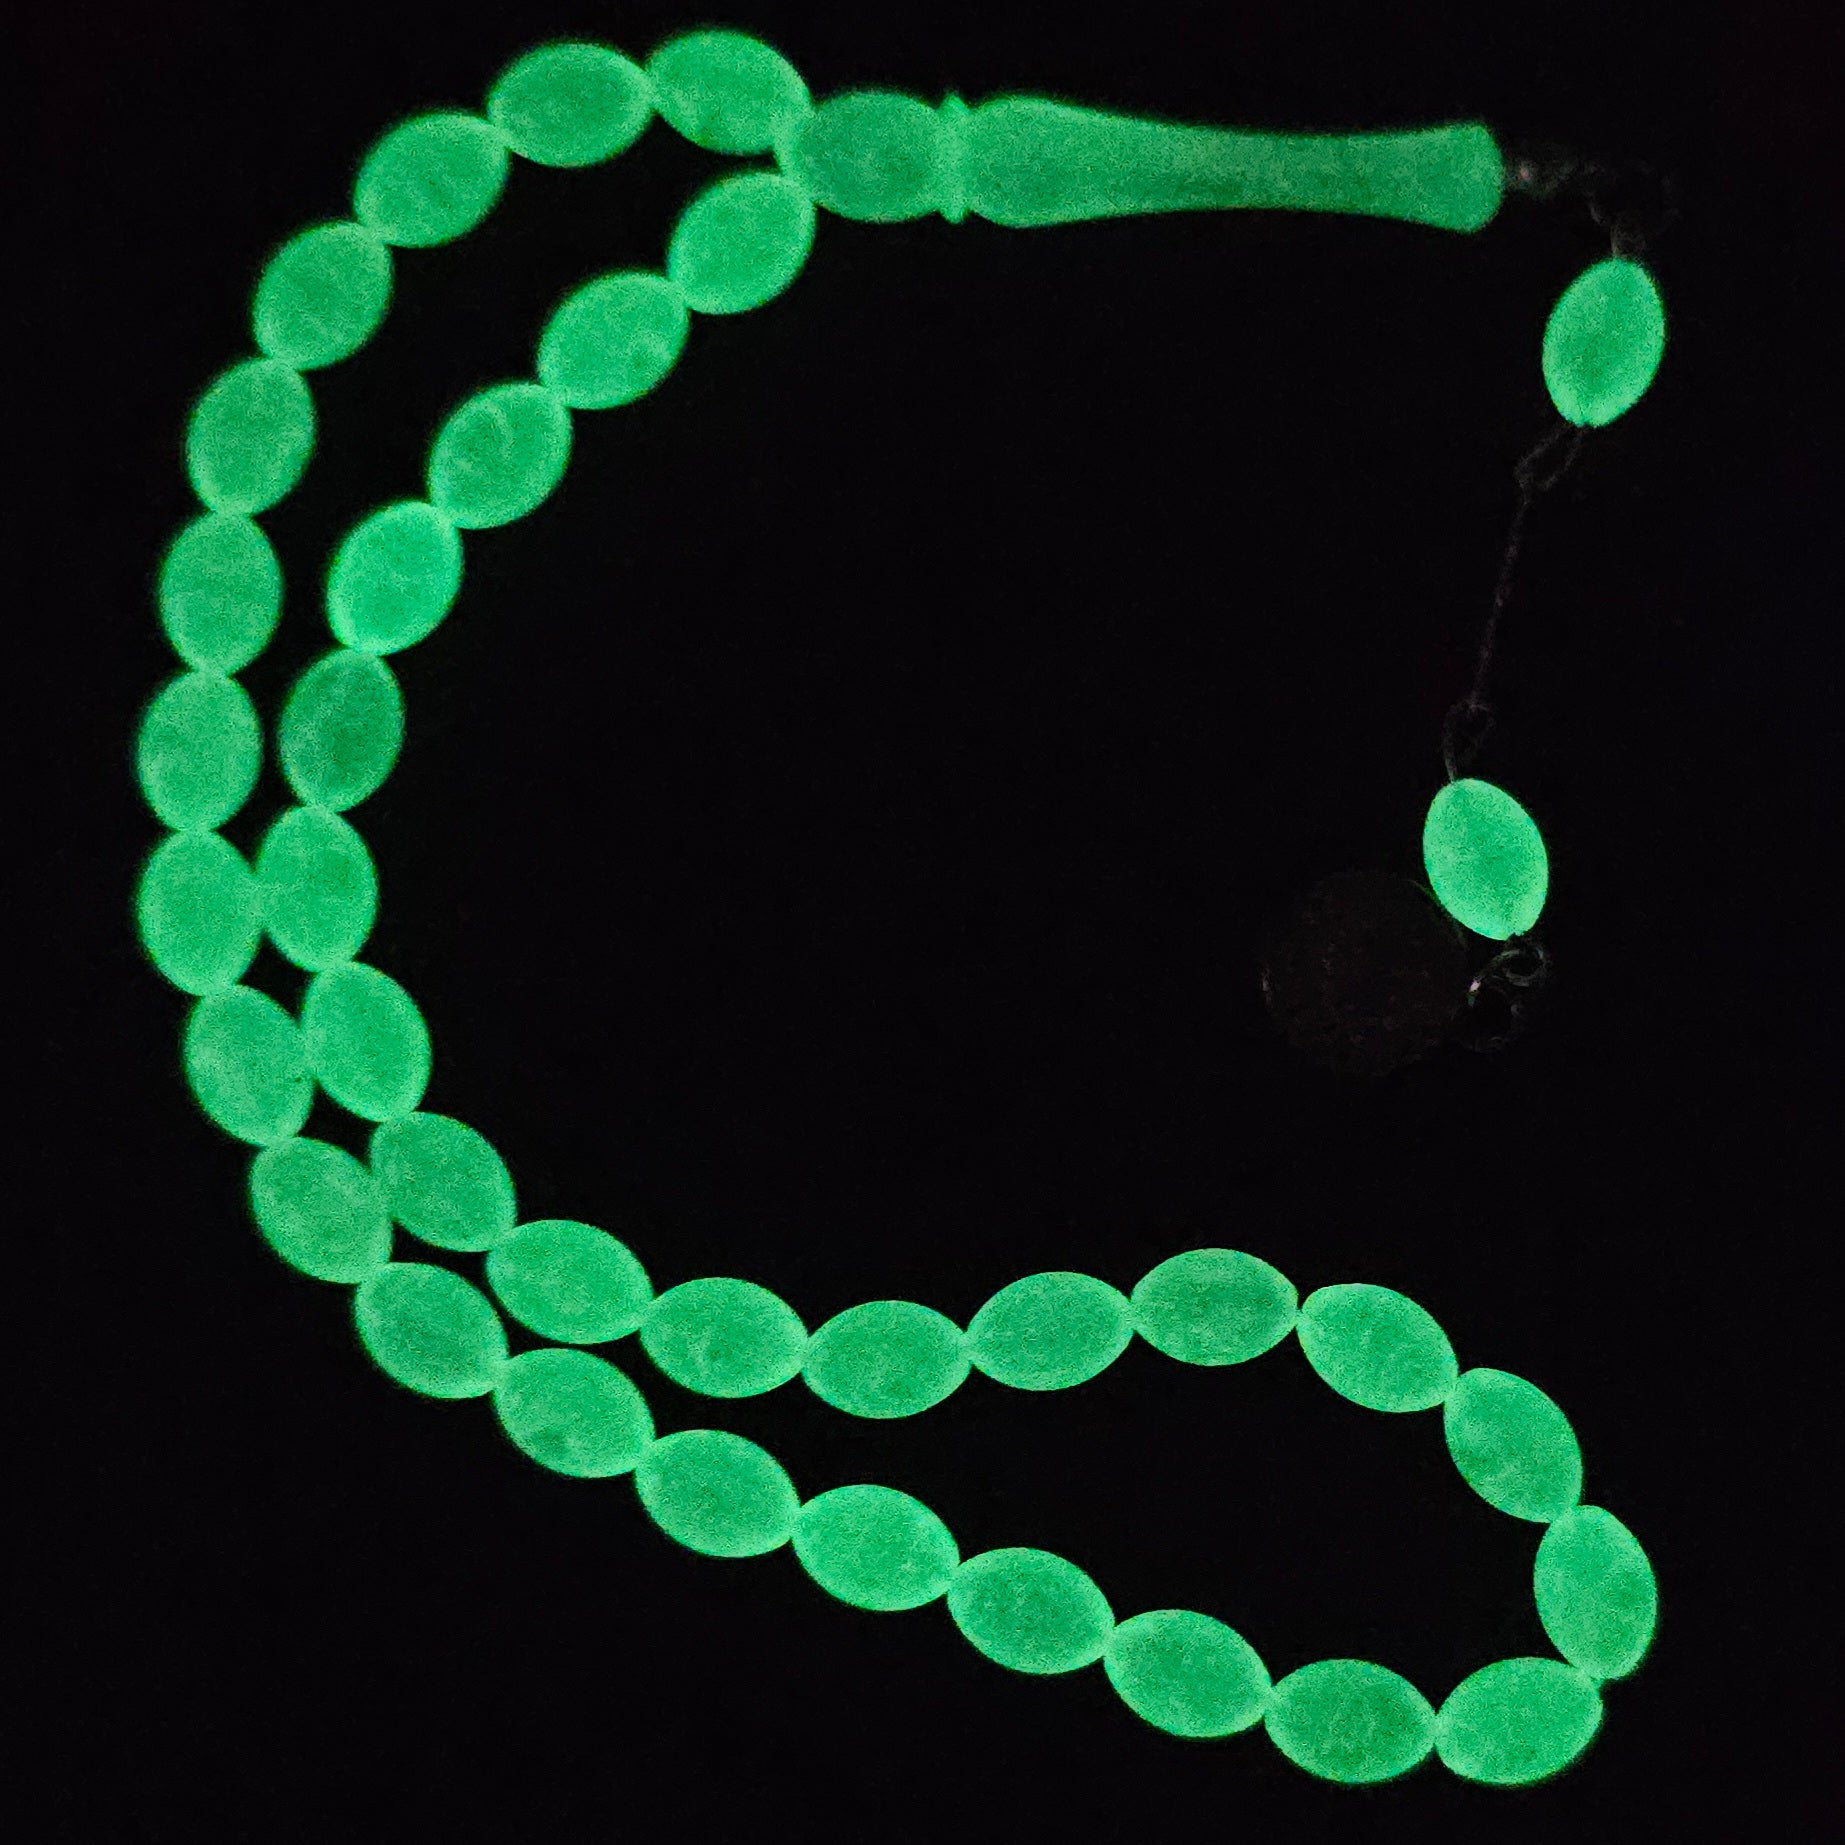 10x7mm Oval Glow In The Dark Beads